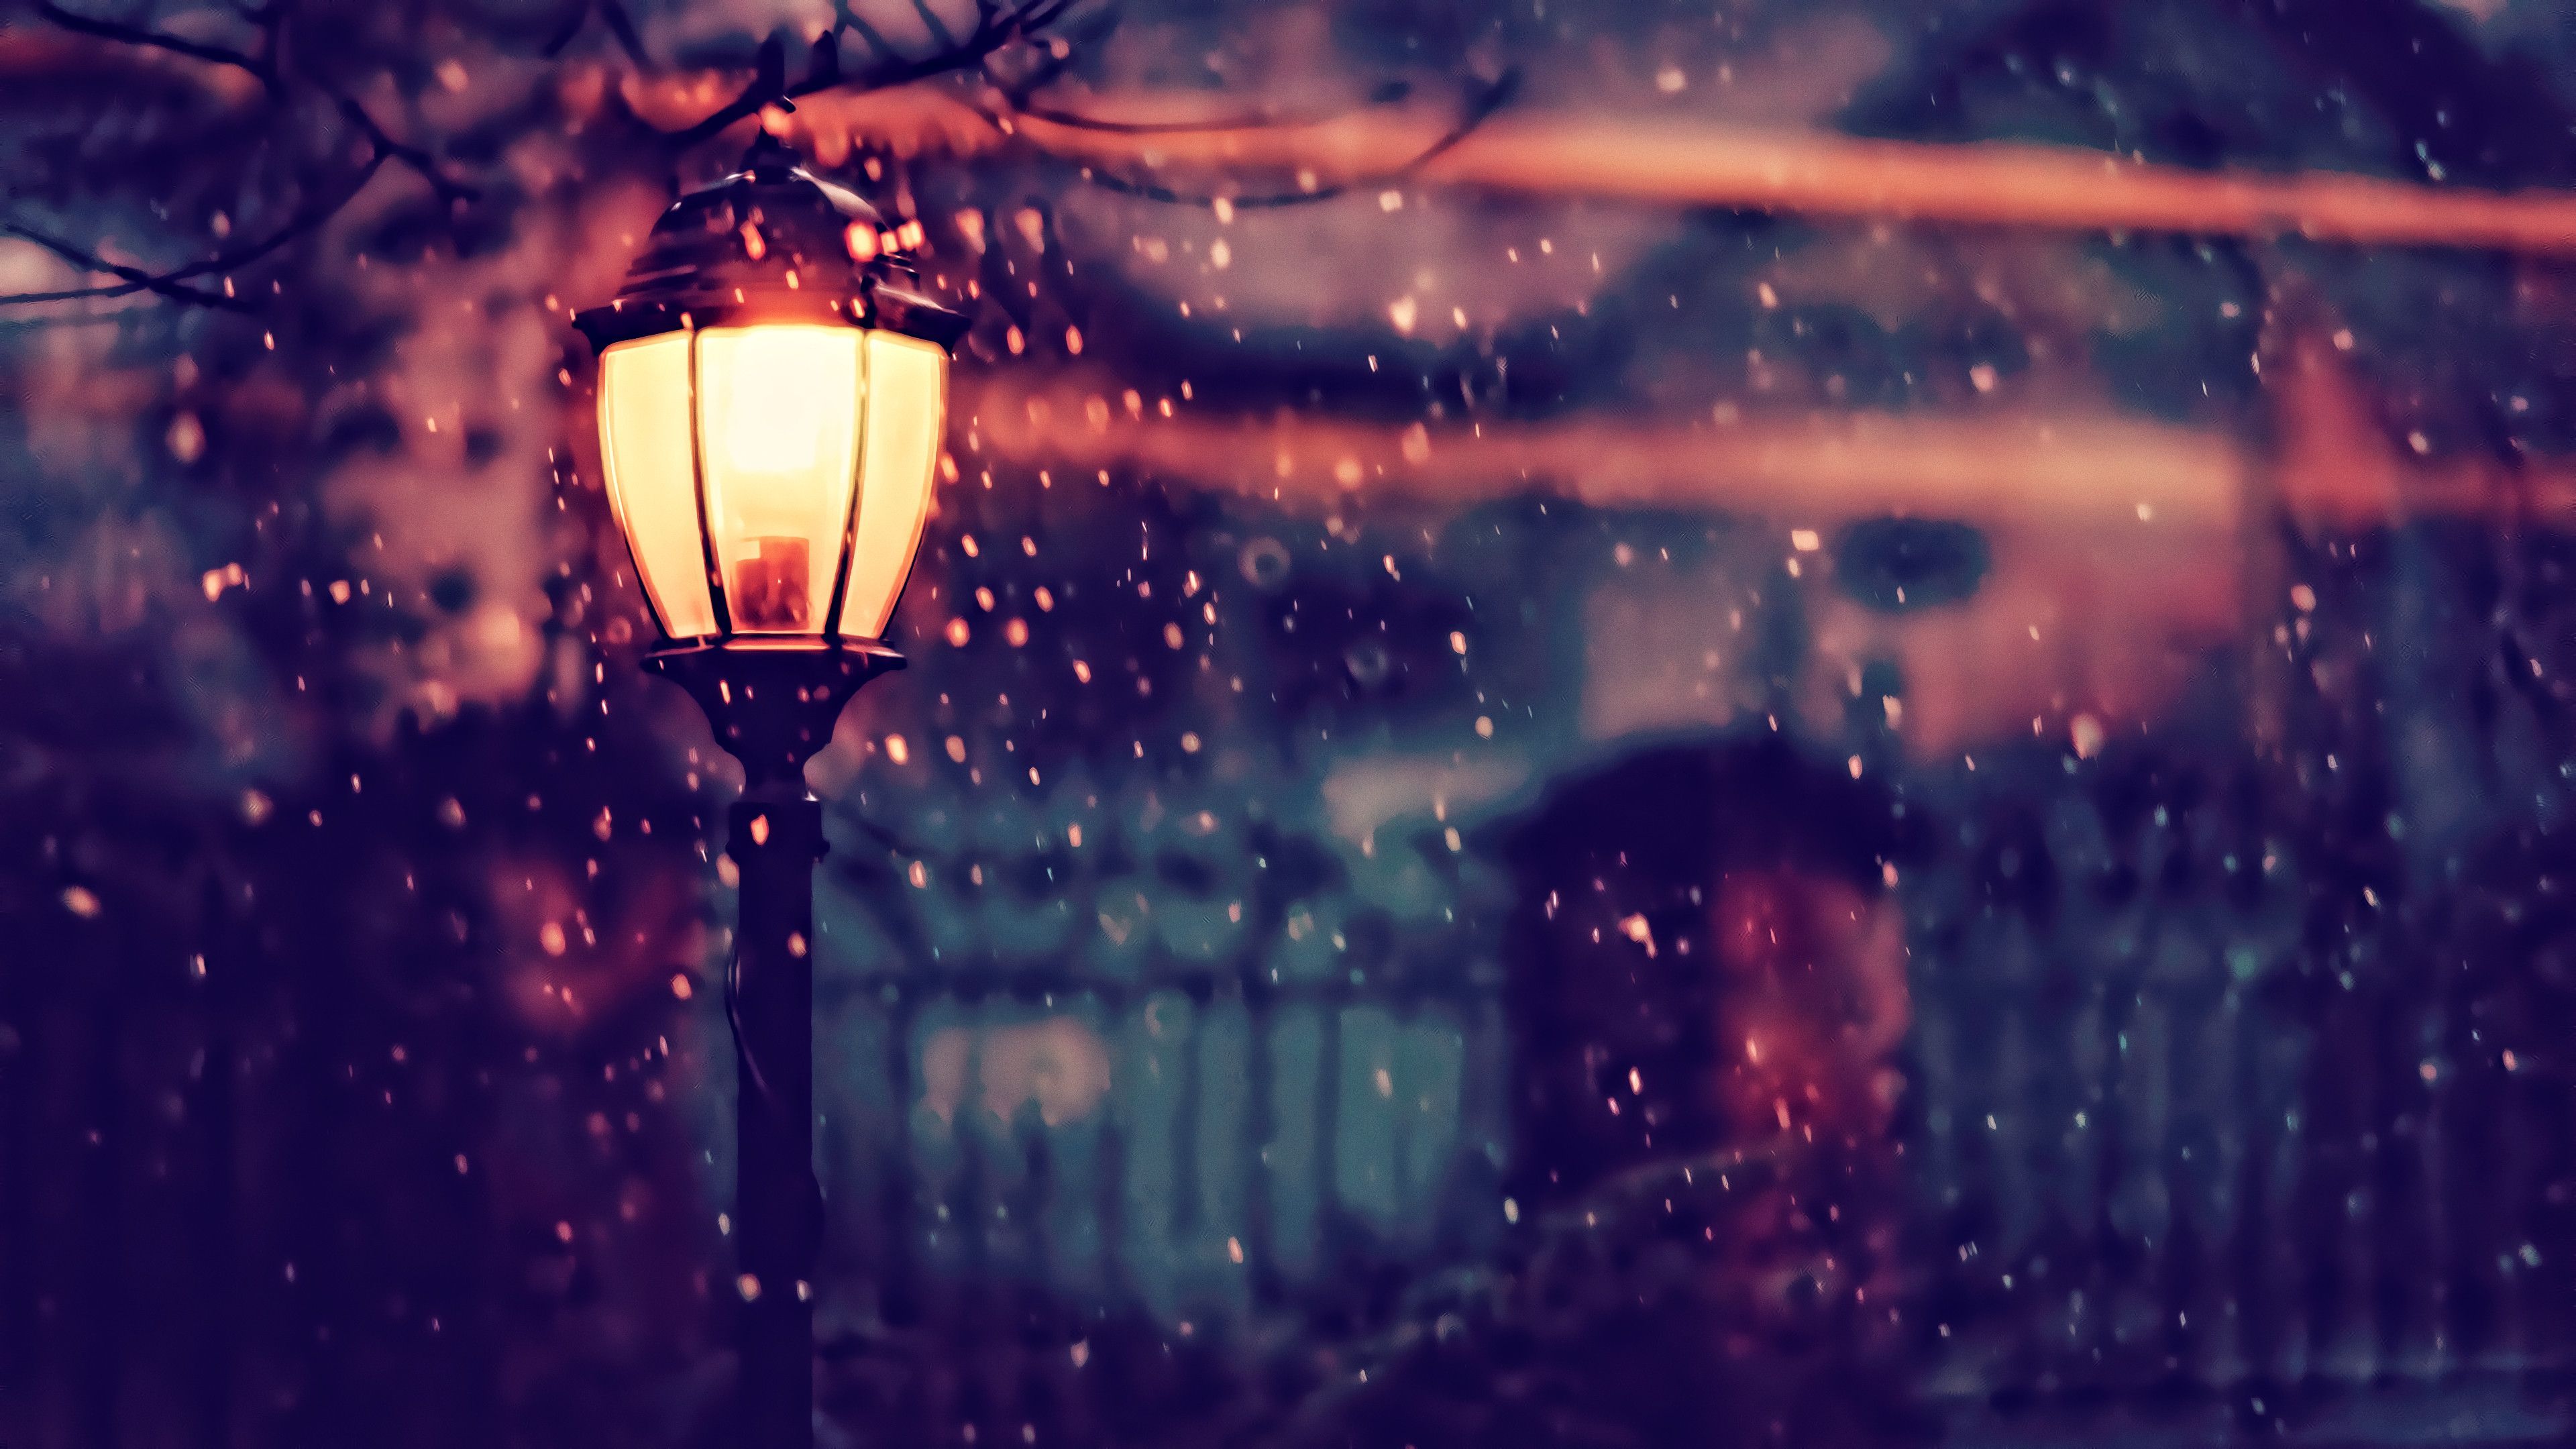 A snowy night with a lit street lamp. - Warm